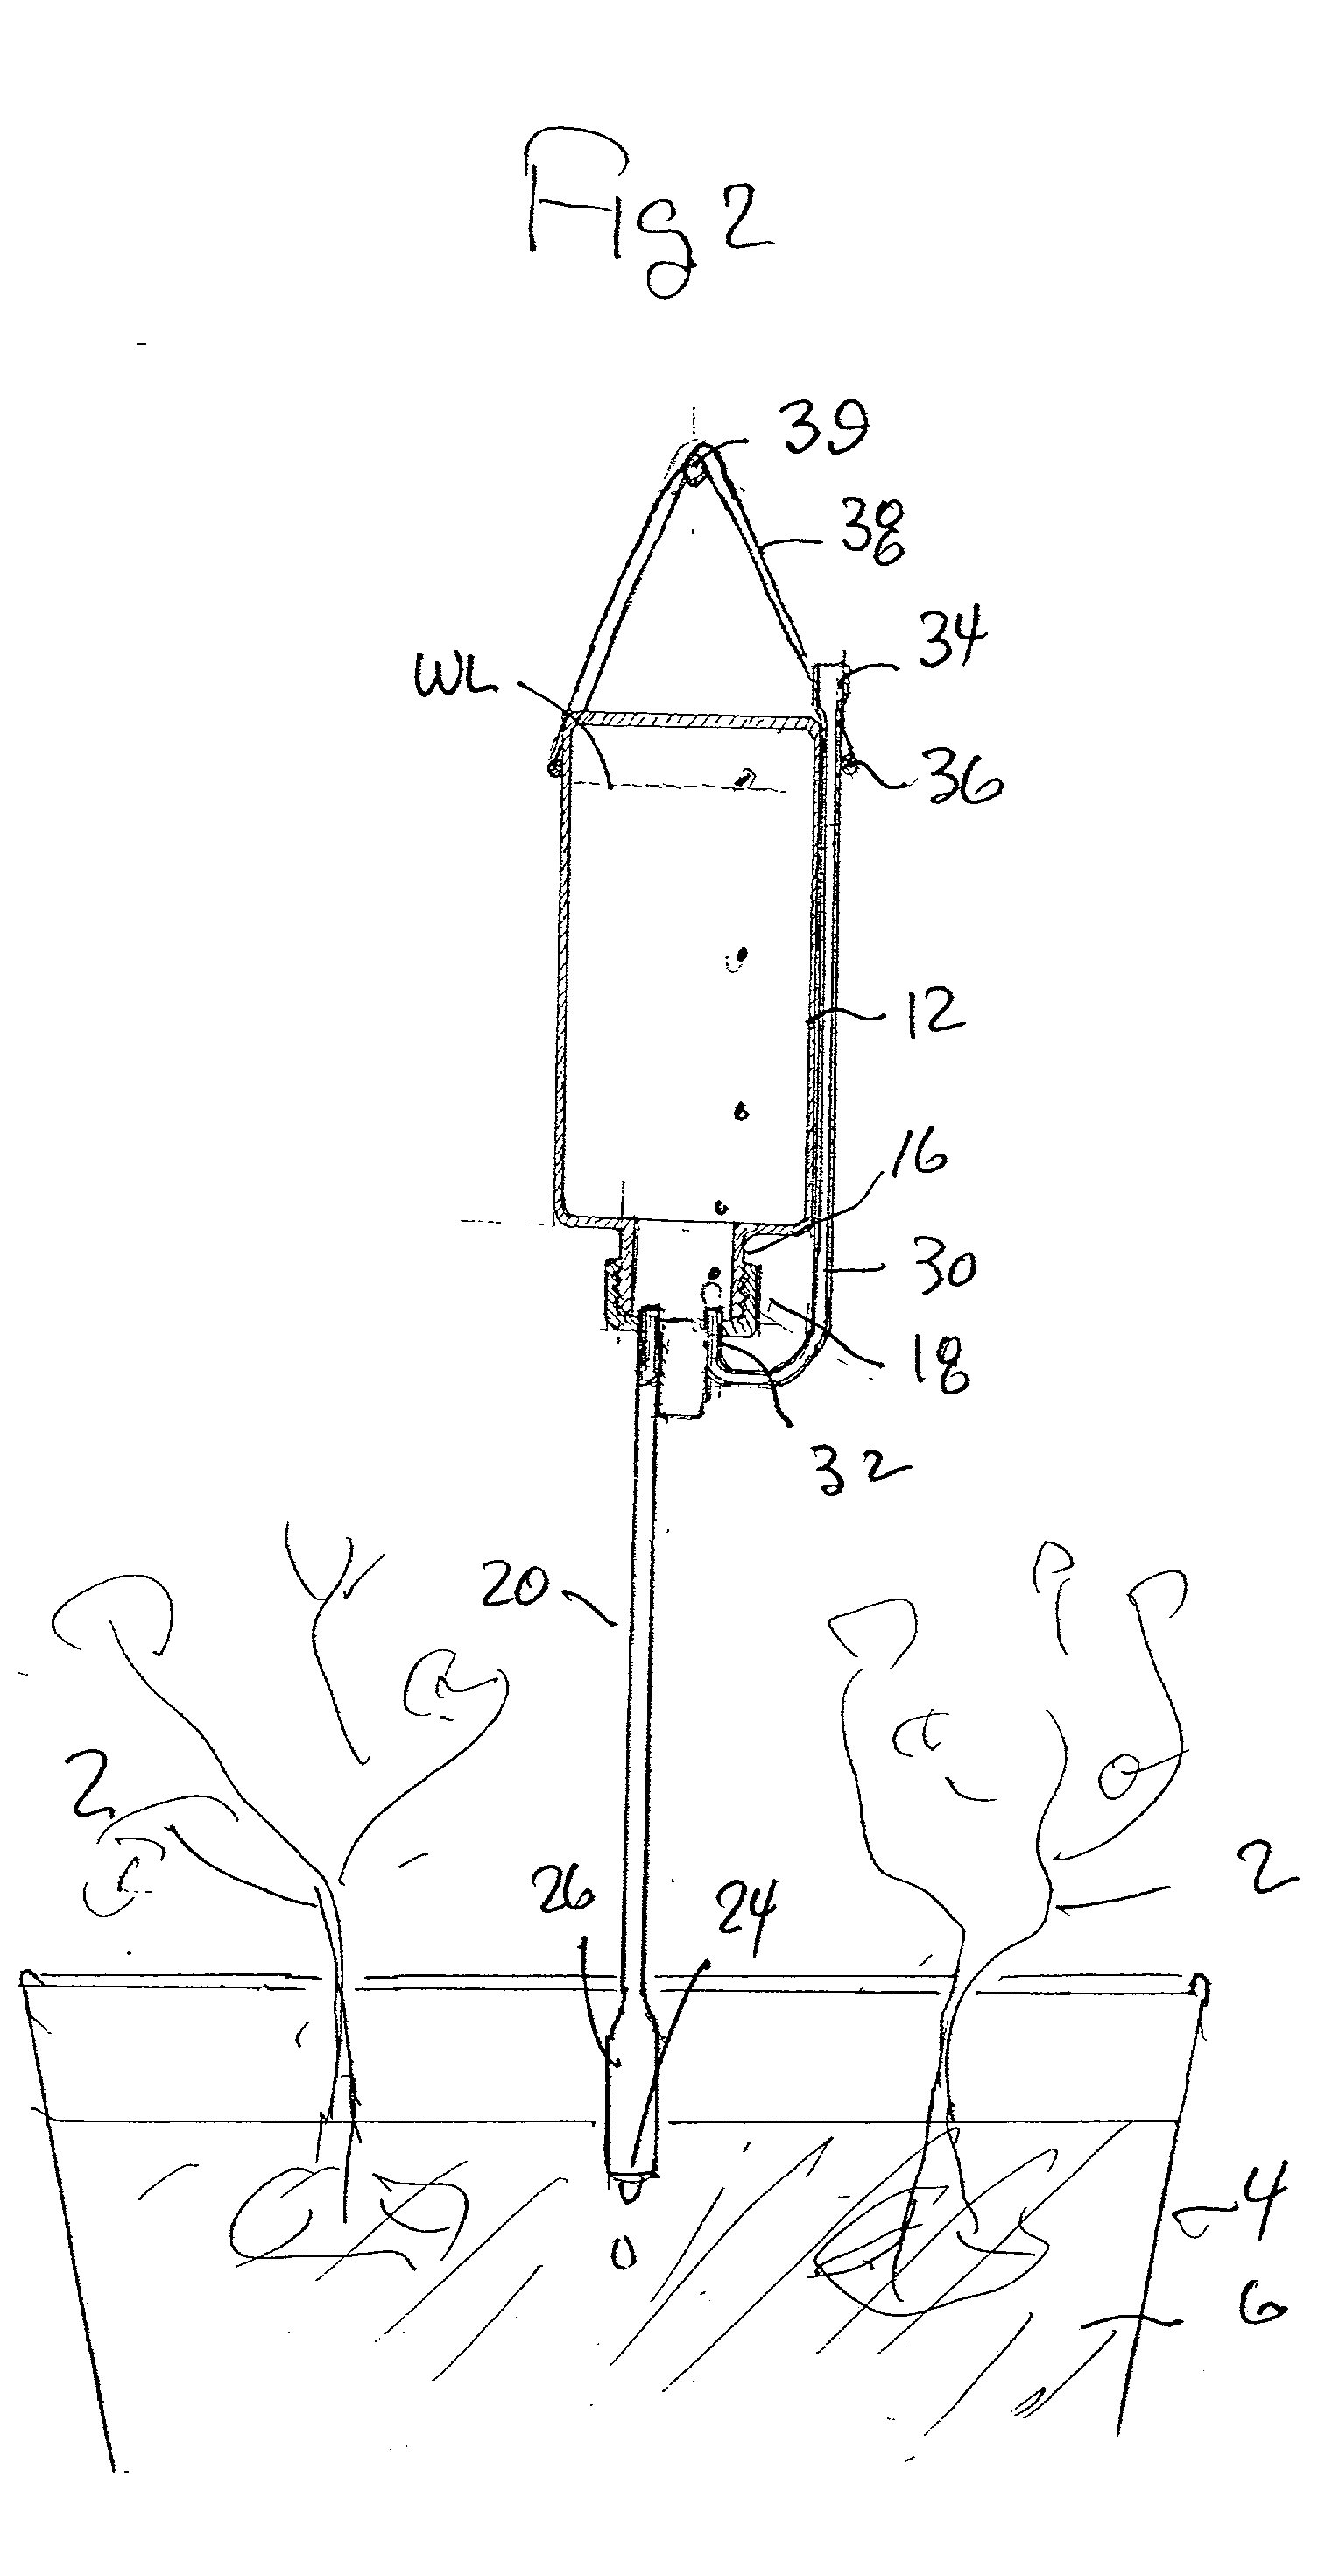 Liquid dispensing devices particularly useful for irrigating plants